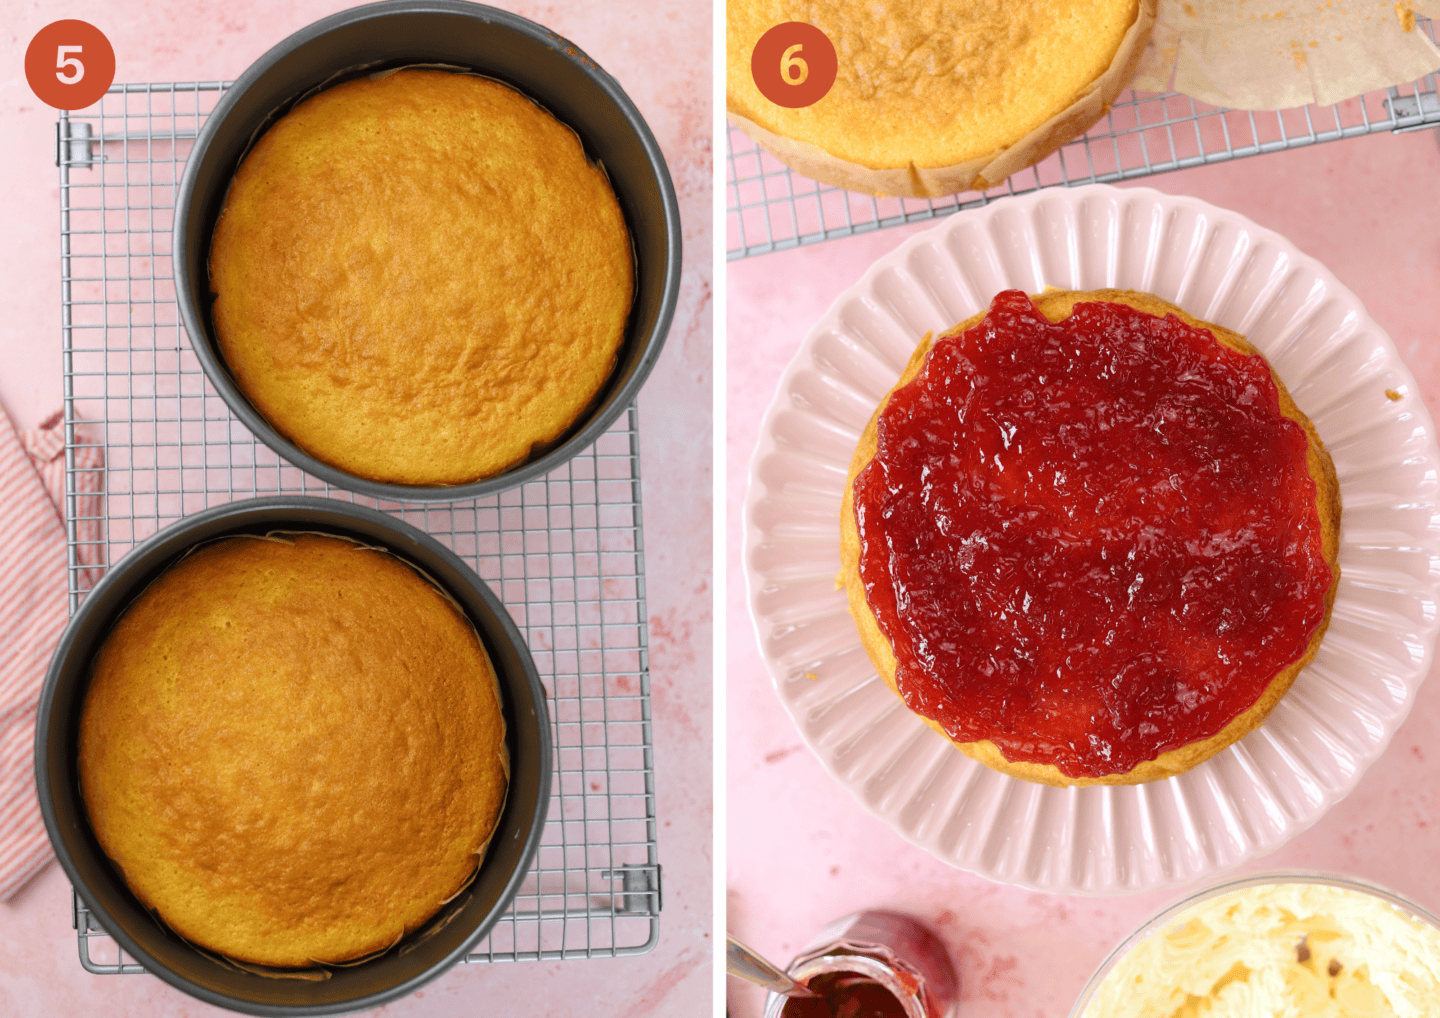 The baked sponge cakes and constructing the Victoria sponge.